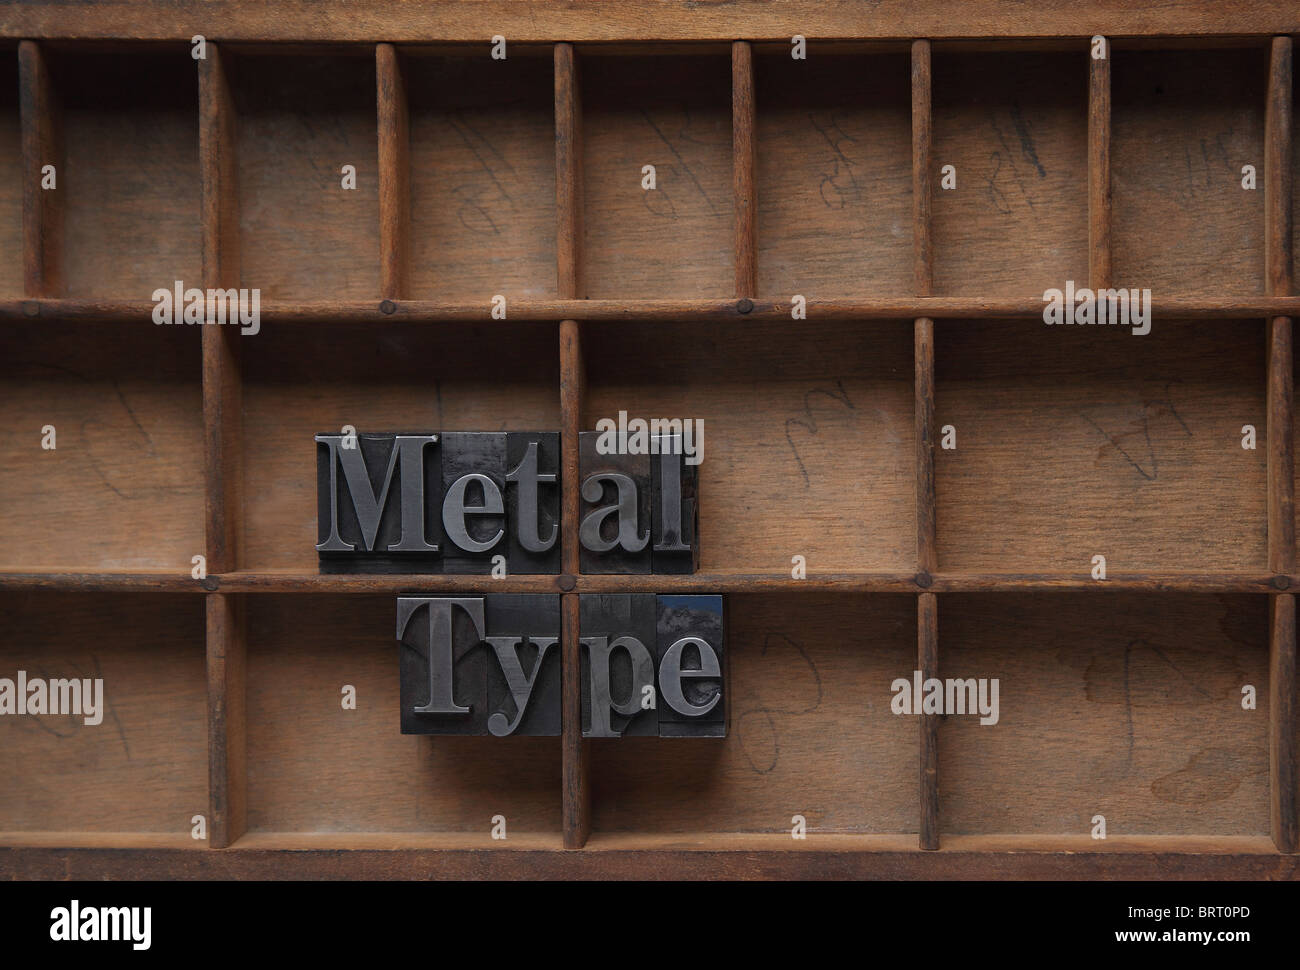 the words metal type in lead on an old case with a printer's reference numbers Stock Photo